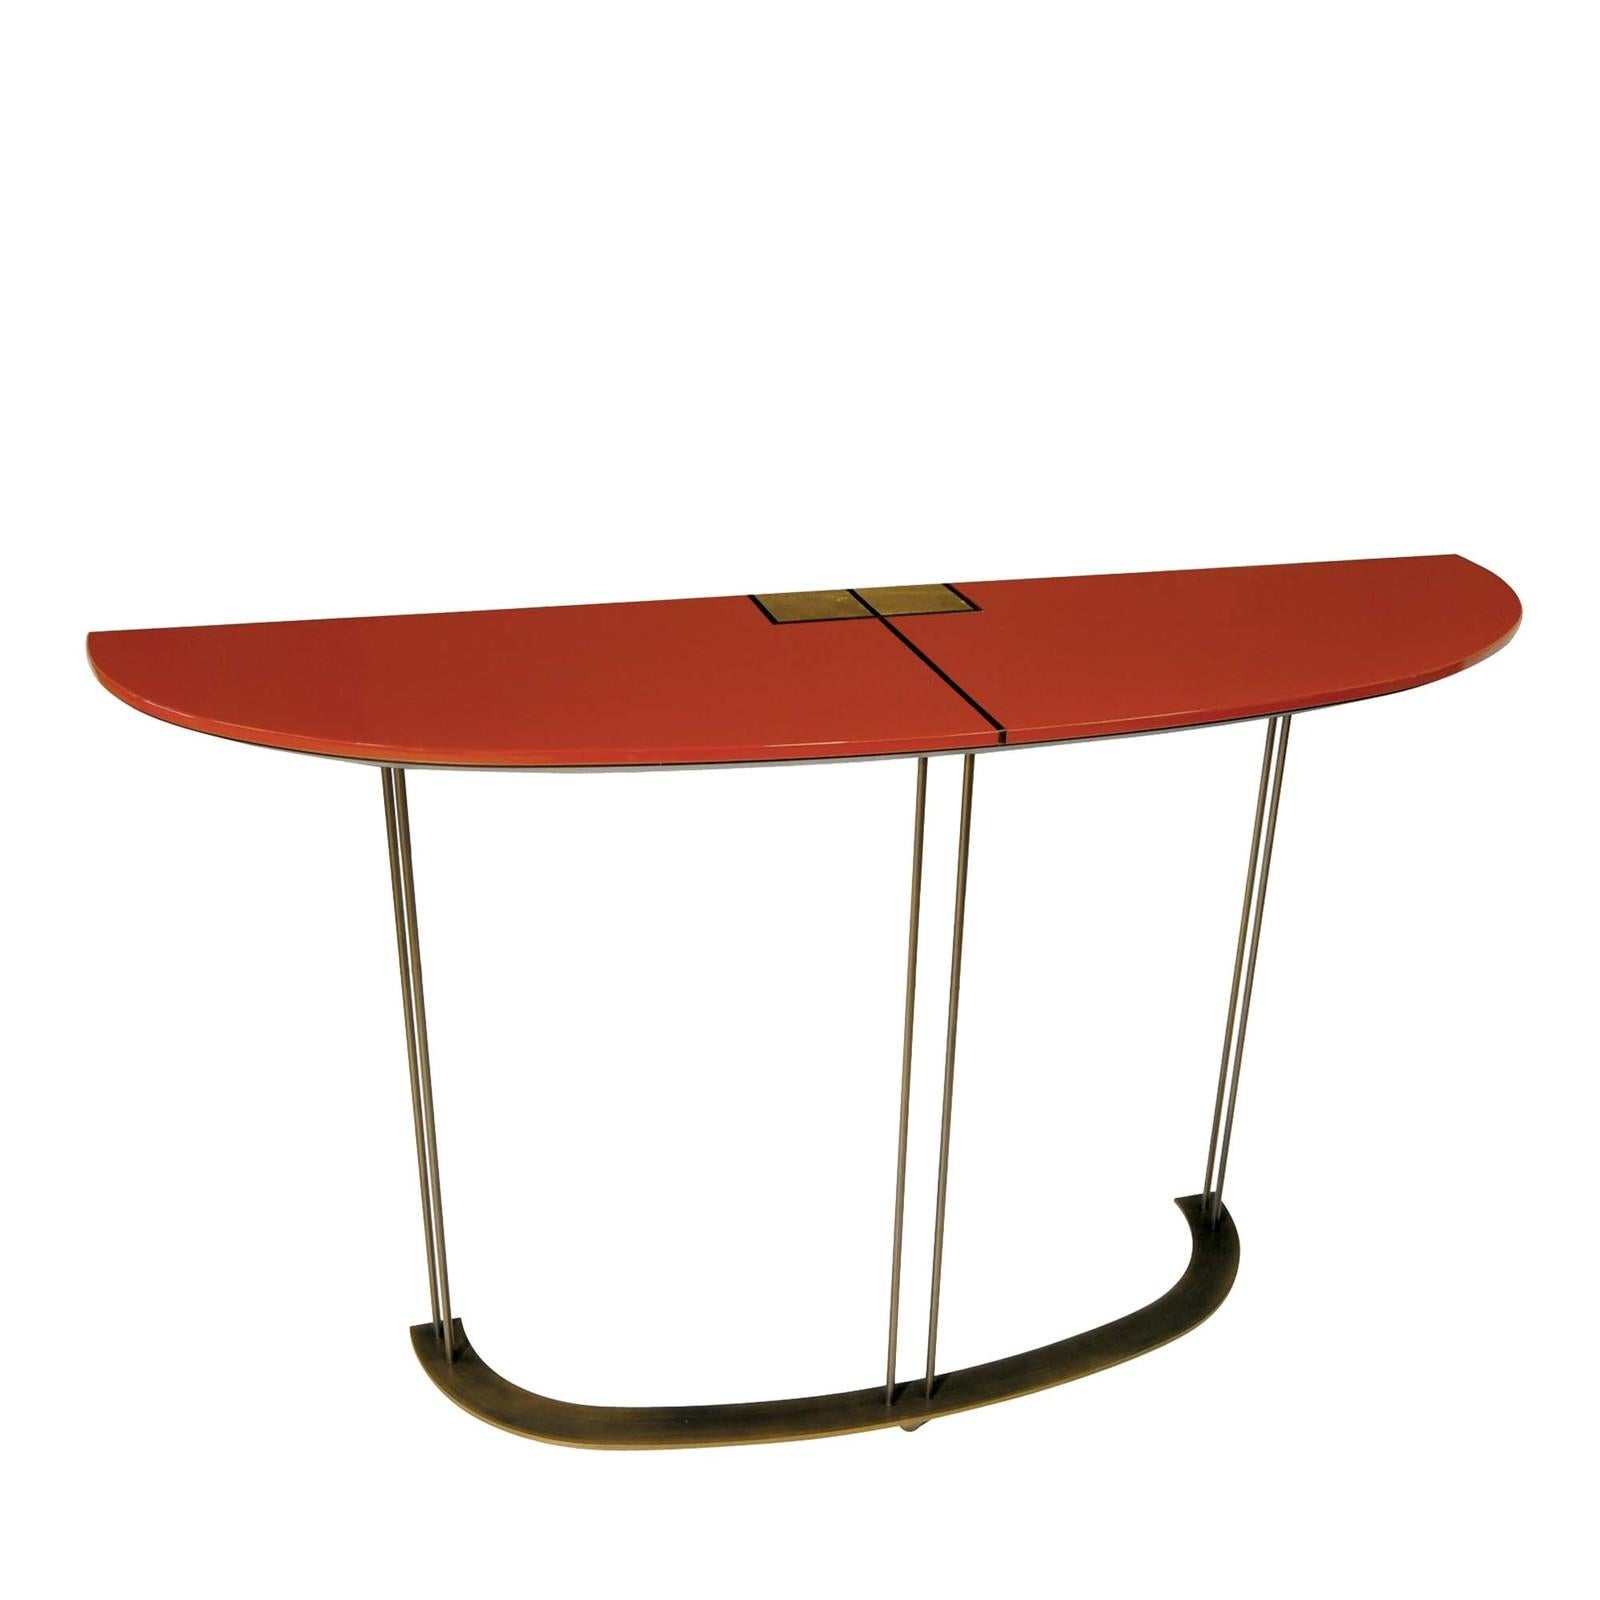 Bold in its simplicity, this modern console is defined by aesthetic versatility and structural lightness. The piece boasts a demilune profile, comprising a wooden top finished in a bright-red shiny polyurethane lacquer supported by the three tall